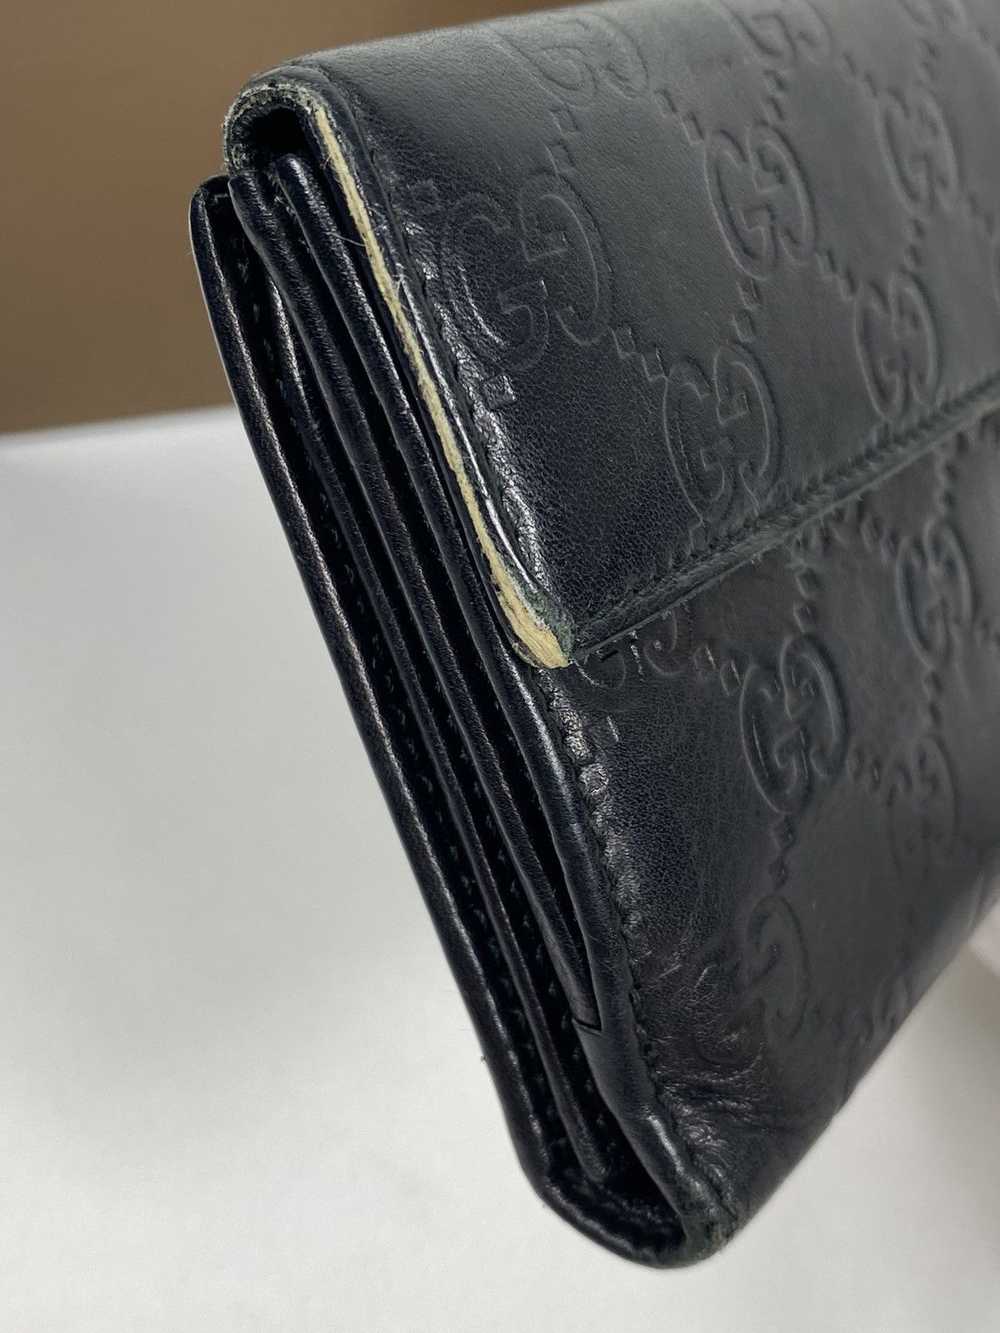 Gucci Gucci GG Guccissima leather long wallet - image 12